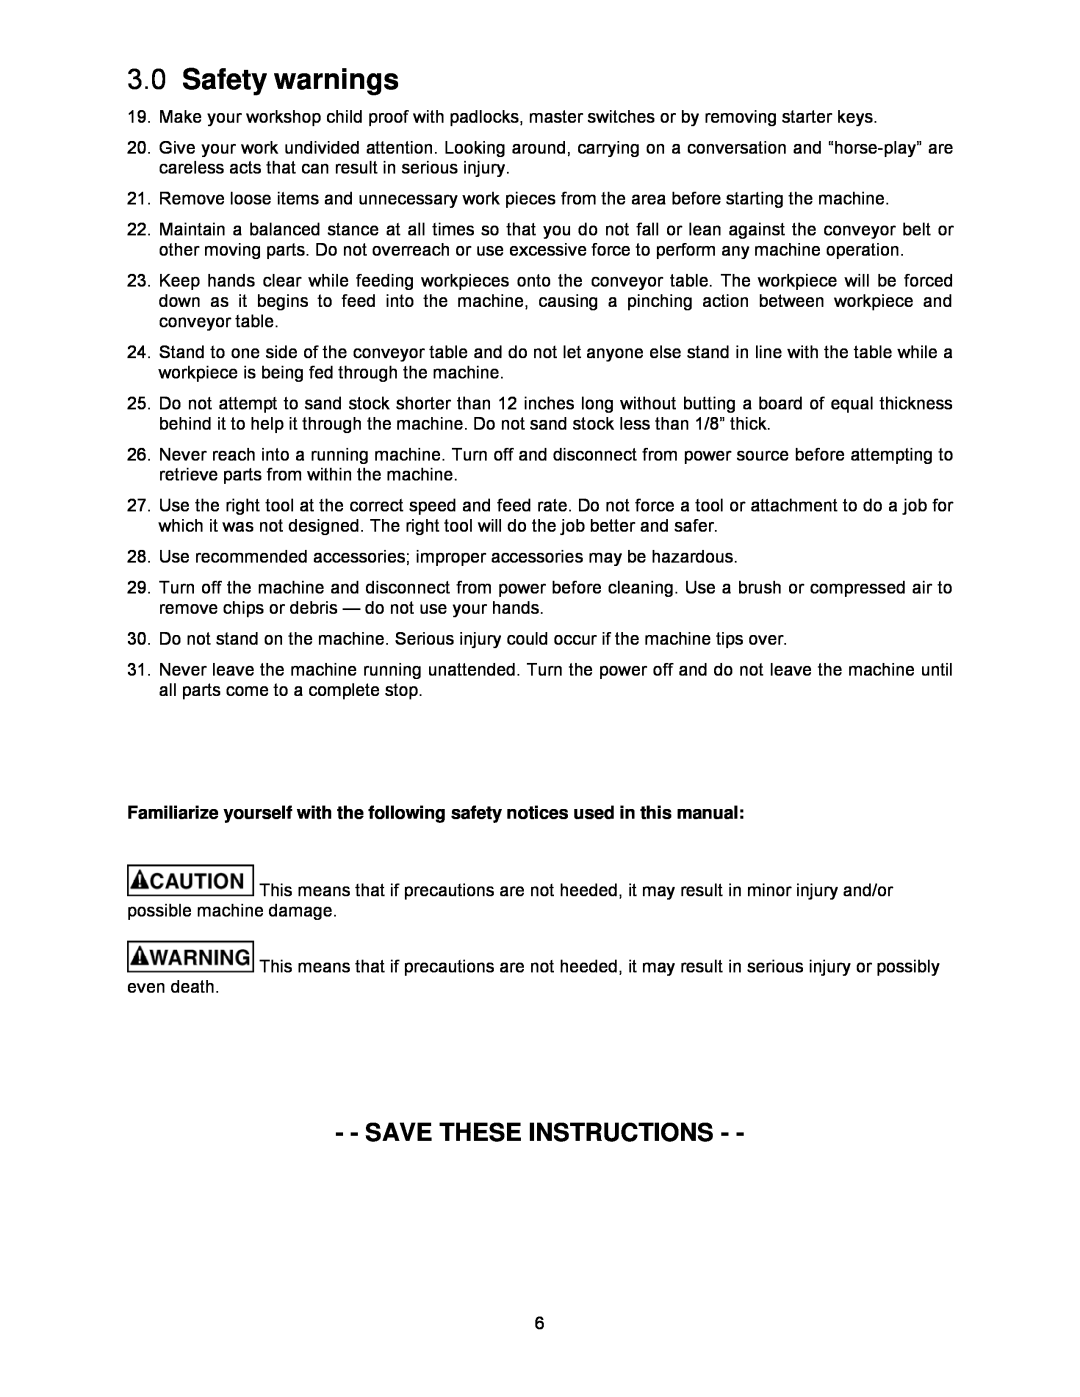 Powermatic WB-37, WB-25, WB-43 operating instructions Save These Instructions, Safety warnings 